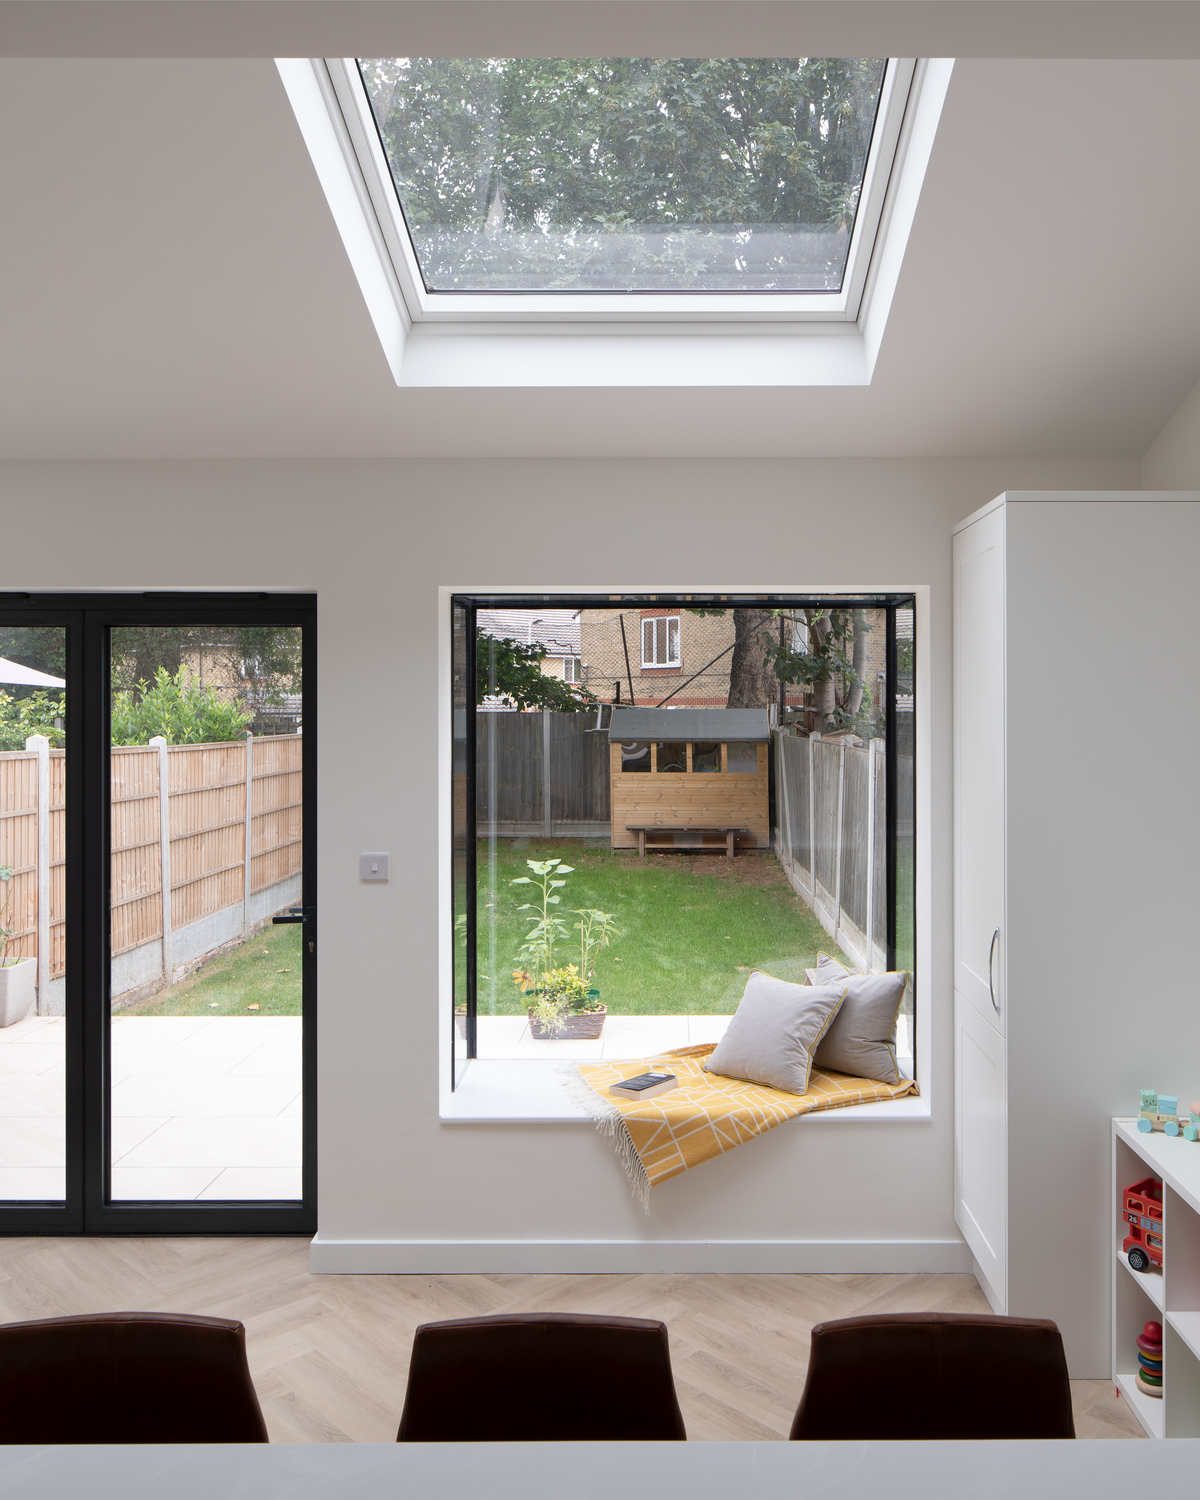  Learn how to Feng Shui your home from Kate and Michael who carved out more space in their family home in Walthamstow with a rear extension and a beautiful reading nook fashioned from an oriel window 